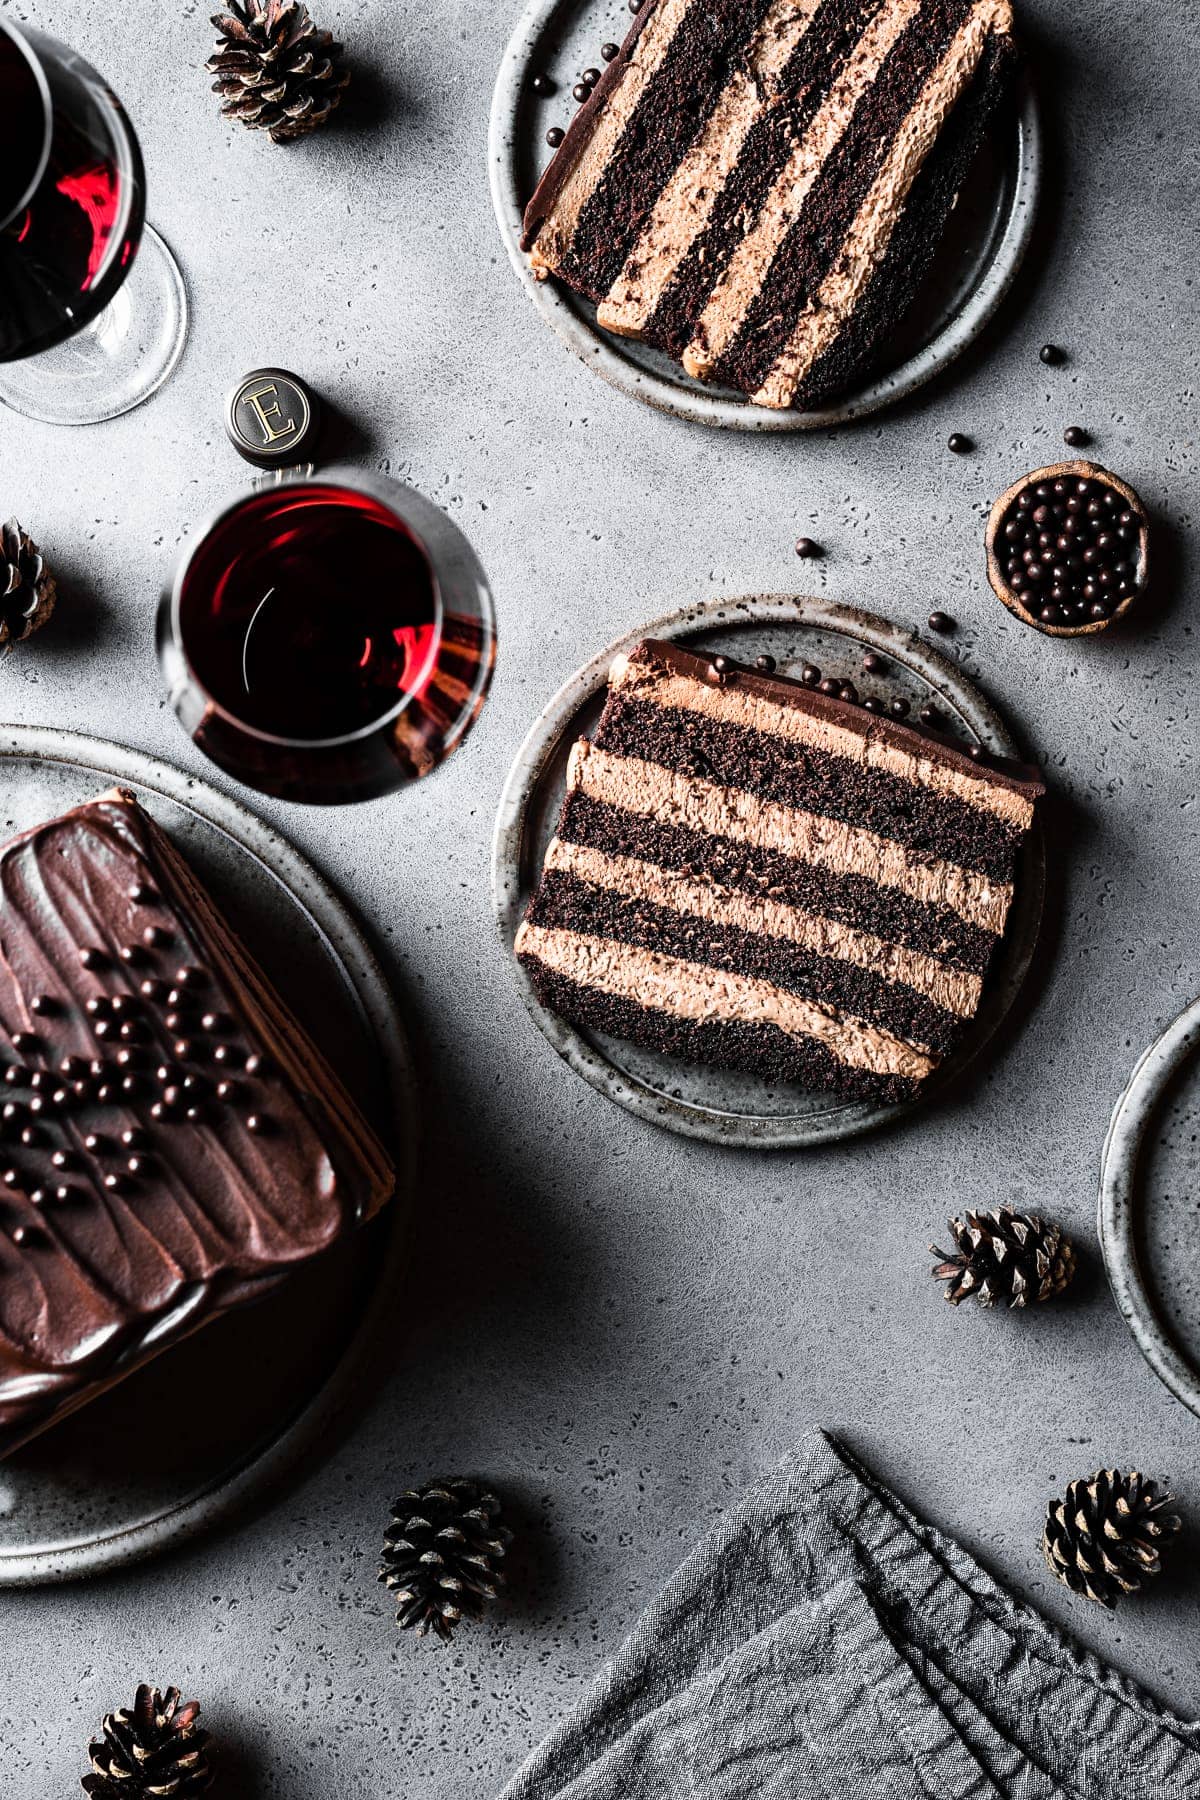 Two slices of chocolate cake on grey speckled ceramic plates on a grey speckled stone surface. A small bowl of edible chocolate pearls is nearby, along with a textured grey linen napkin, two glasses of red wine, and pine cones. A serving platter nearby holds the remainder of the cake. 